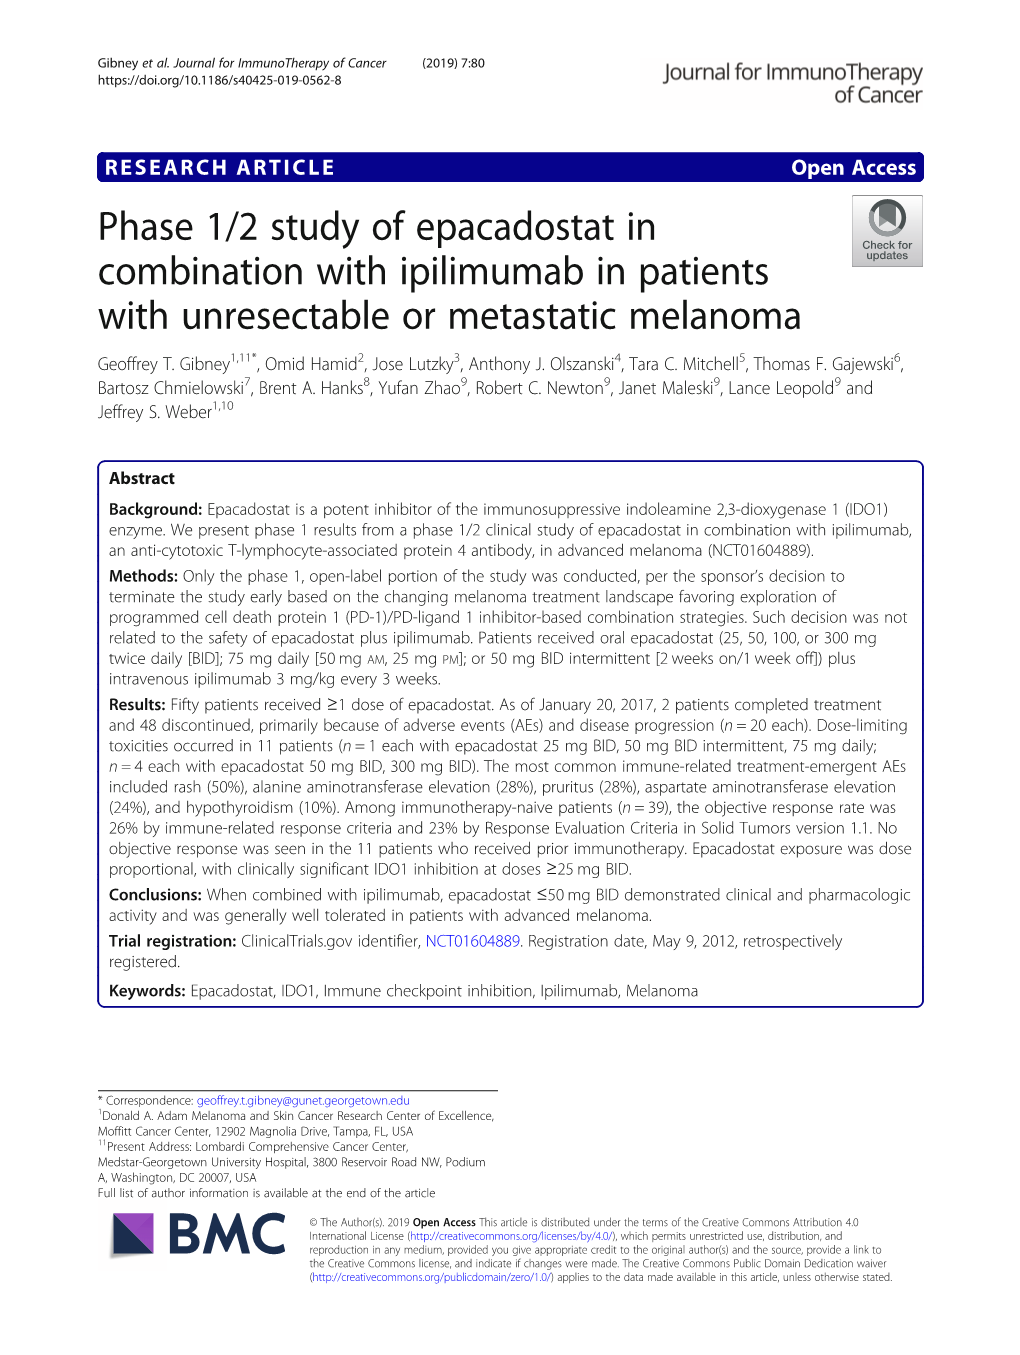 Phase 1/2 Study of Epacadostat in Combination with Ipilimumab in Patients with Unresectable Or Metastatic Melanoma Geoffrey T